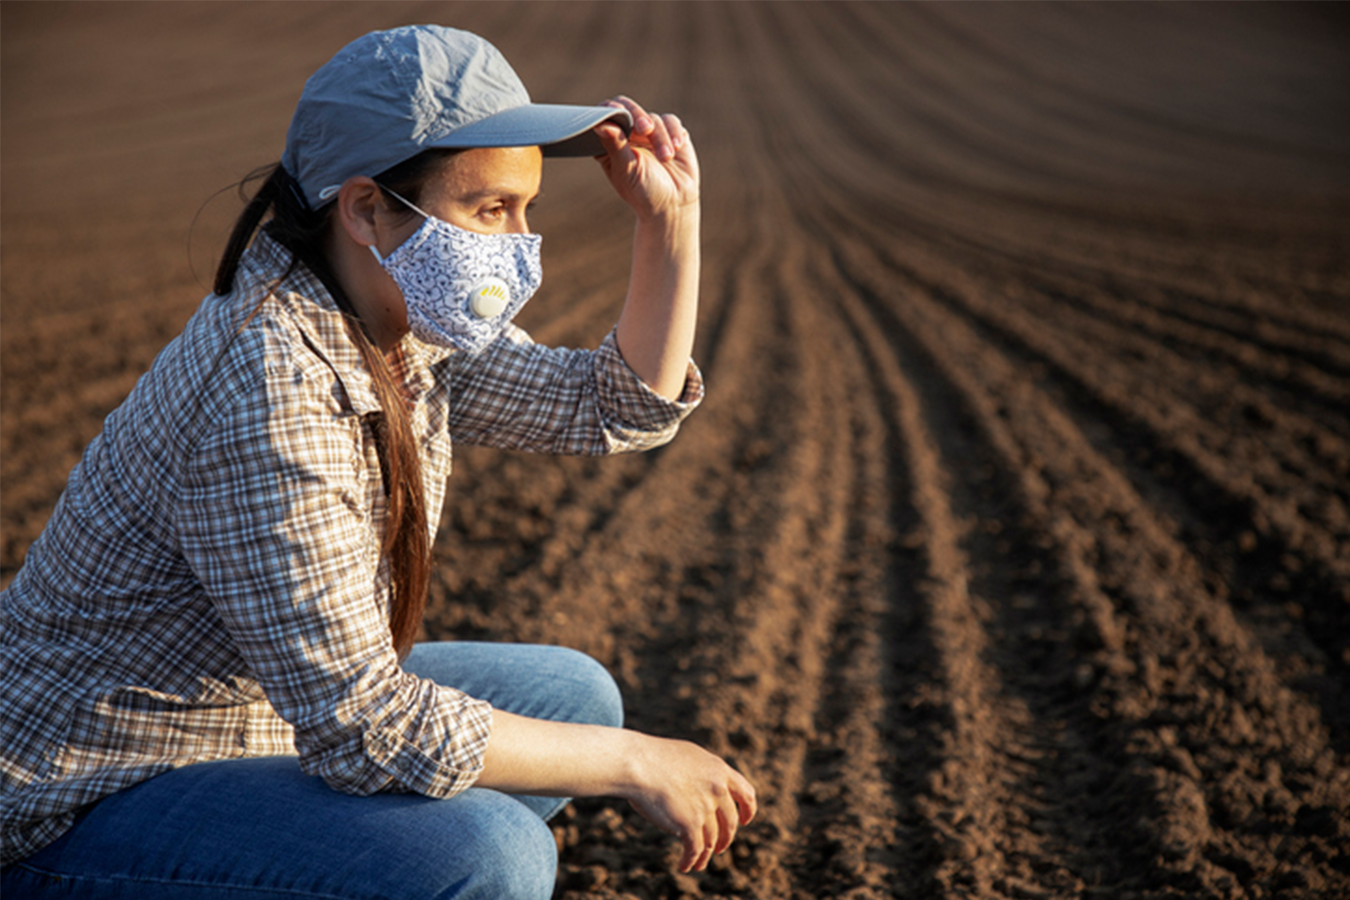 Woman wearing  blue cap, a flannel, jeans and a mask squatting in a rural dirt field and looking off in the distance.